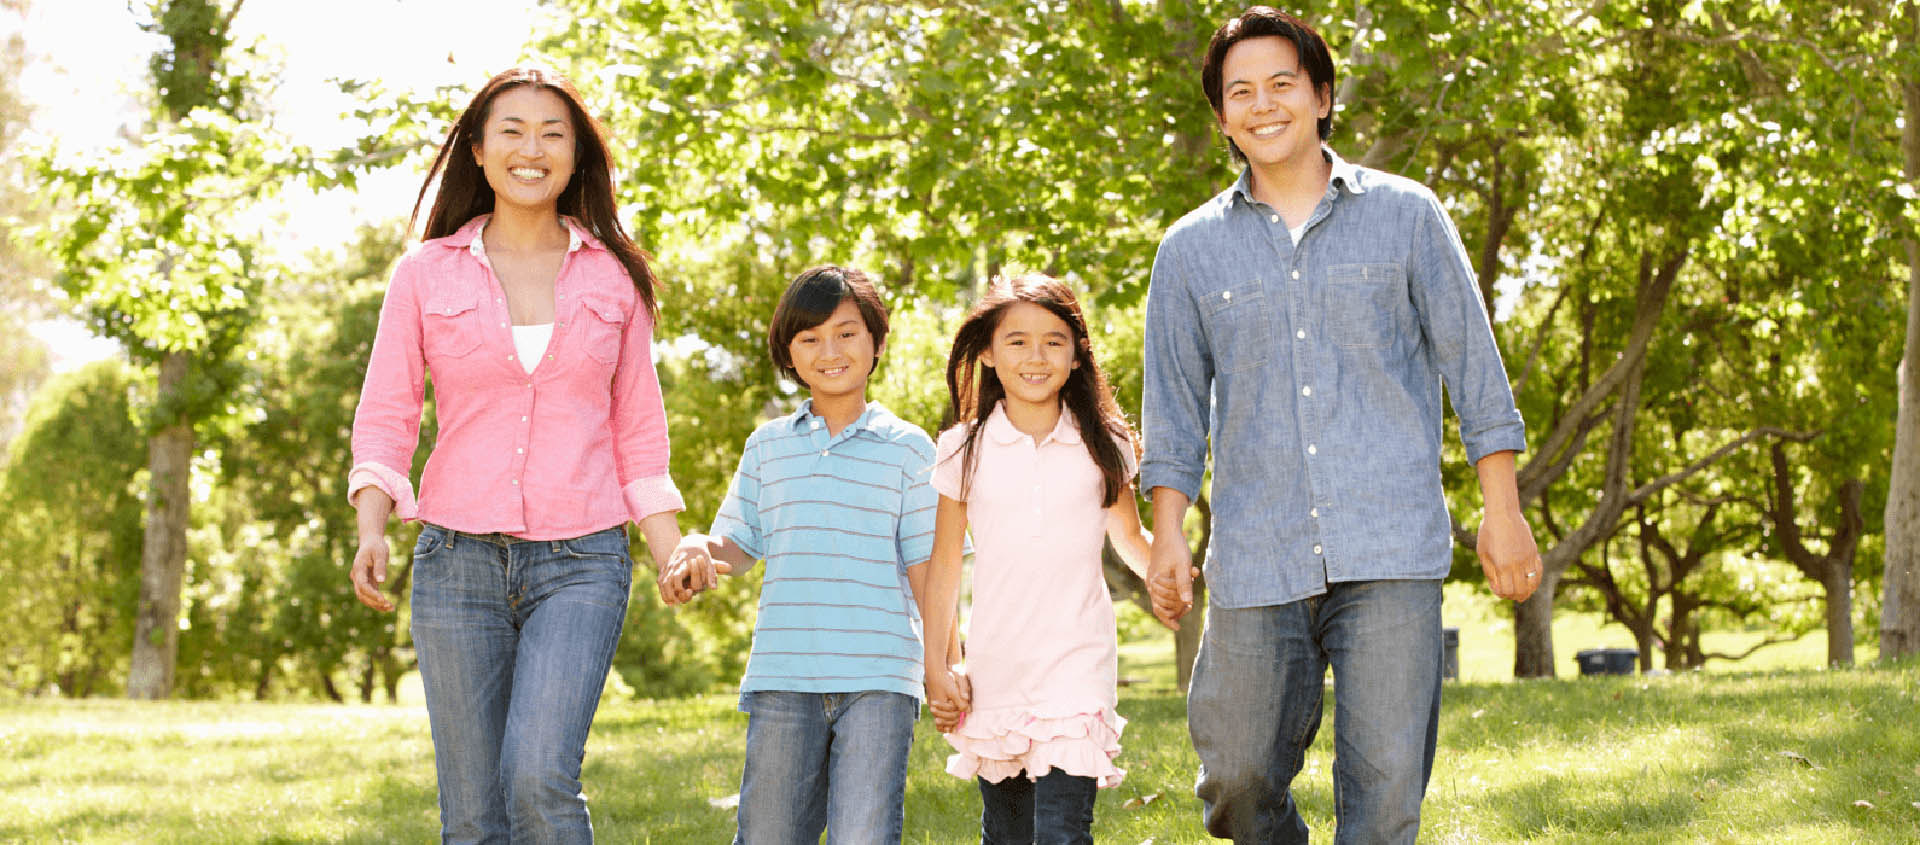 Why New Communities Are the Best Choice for Families Featured Image